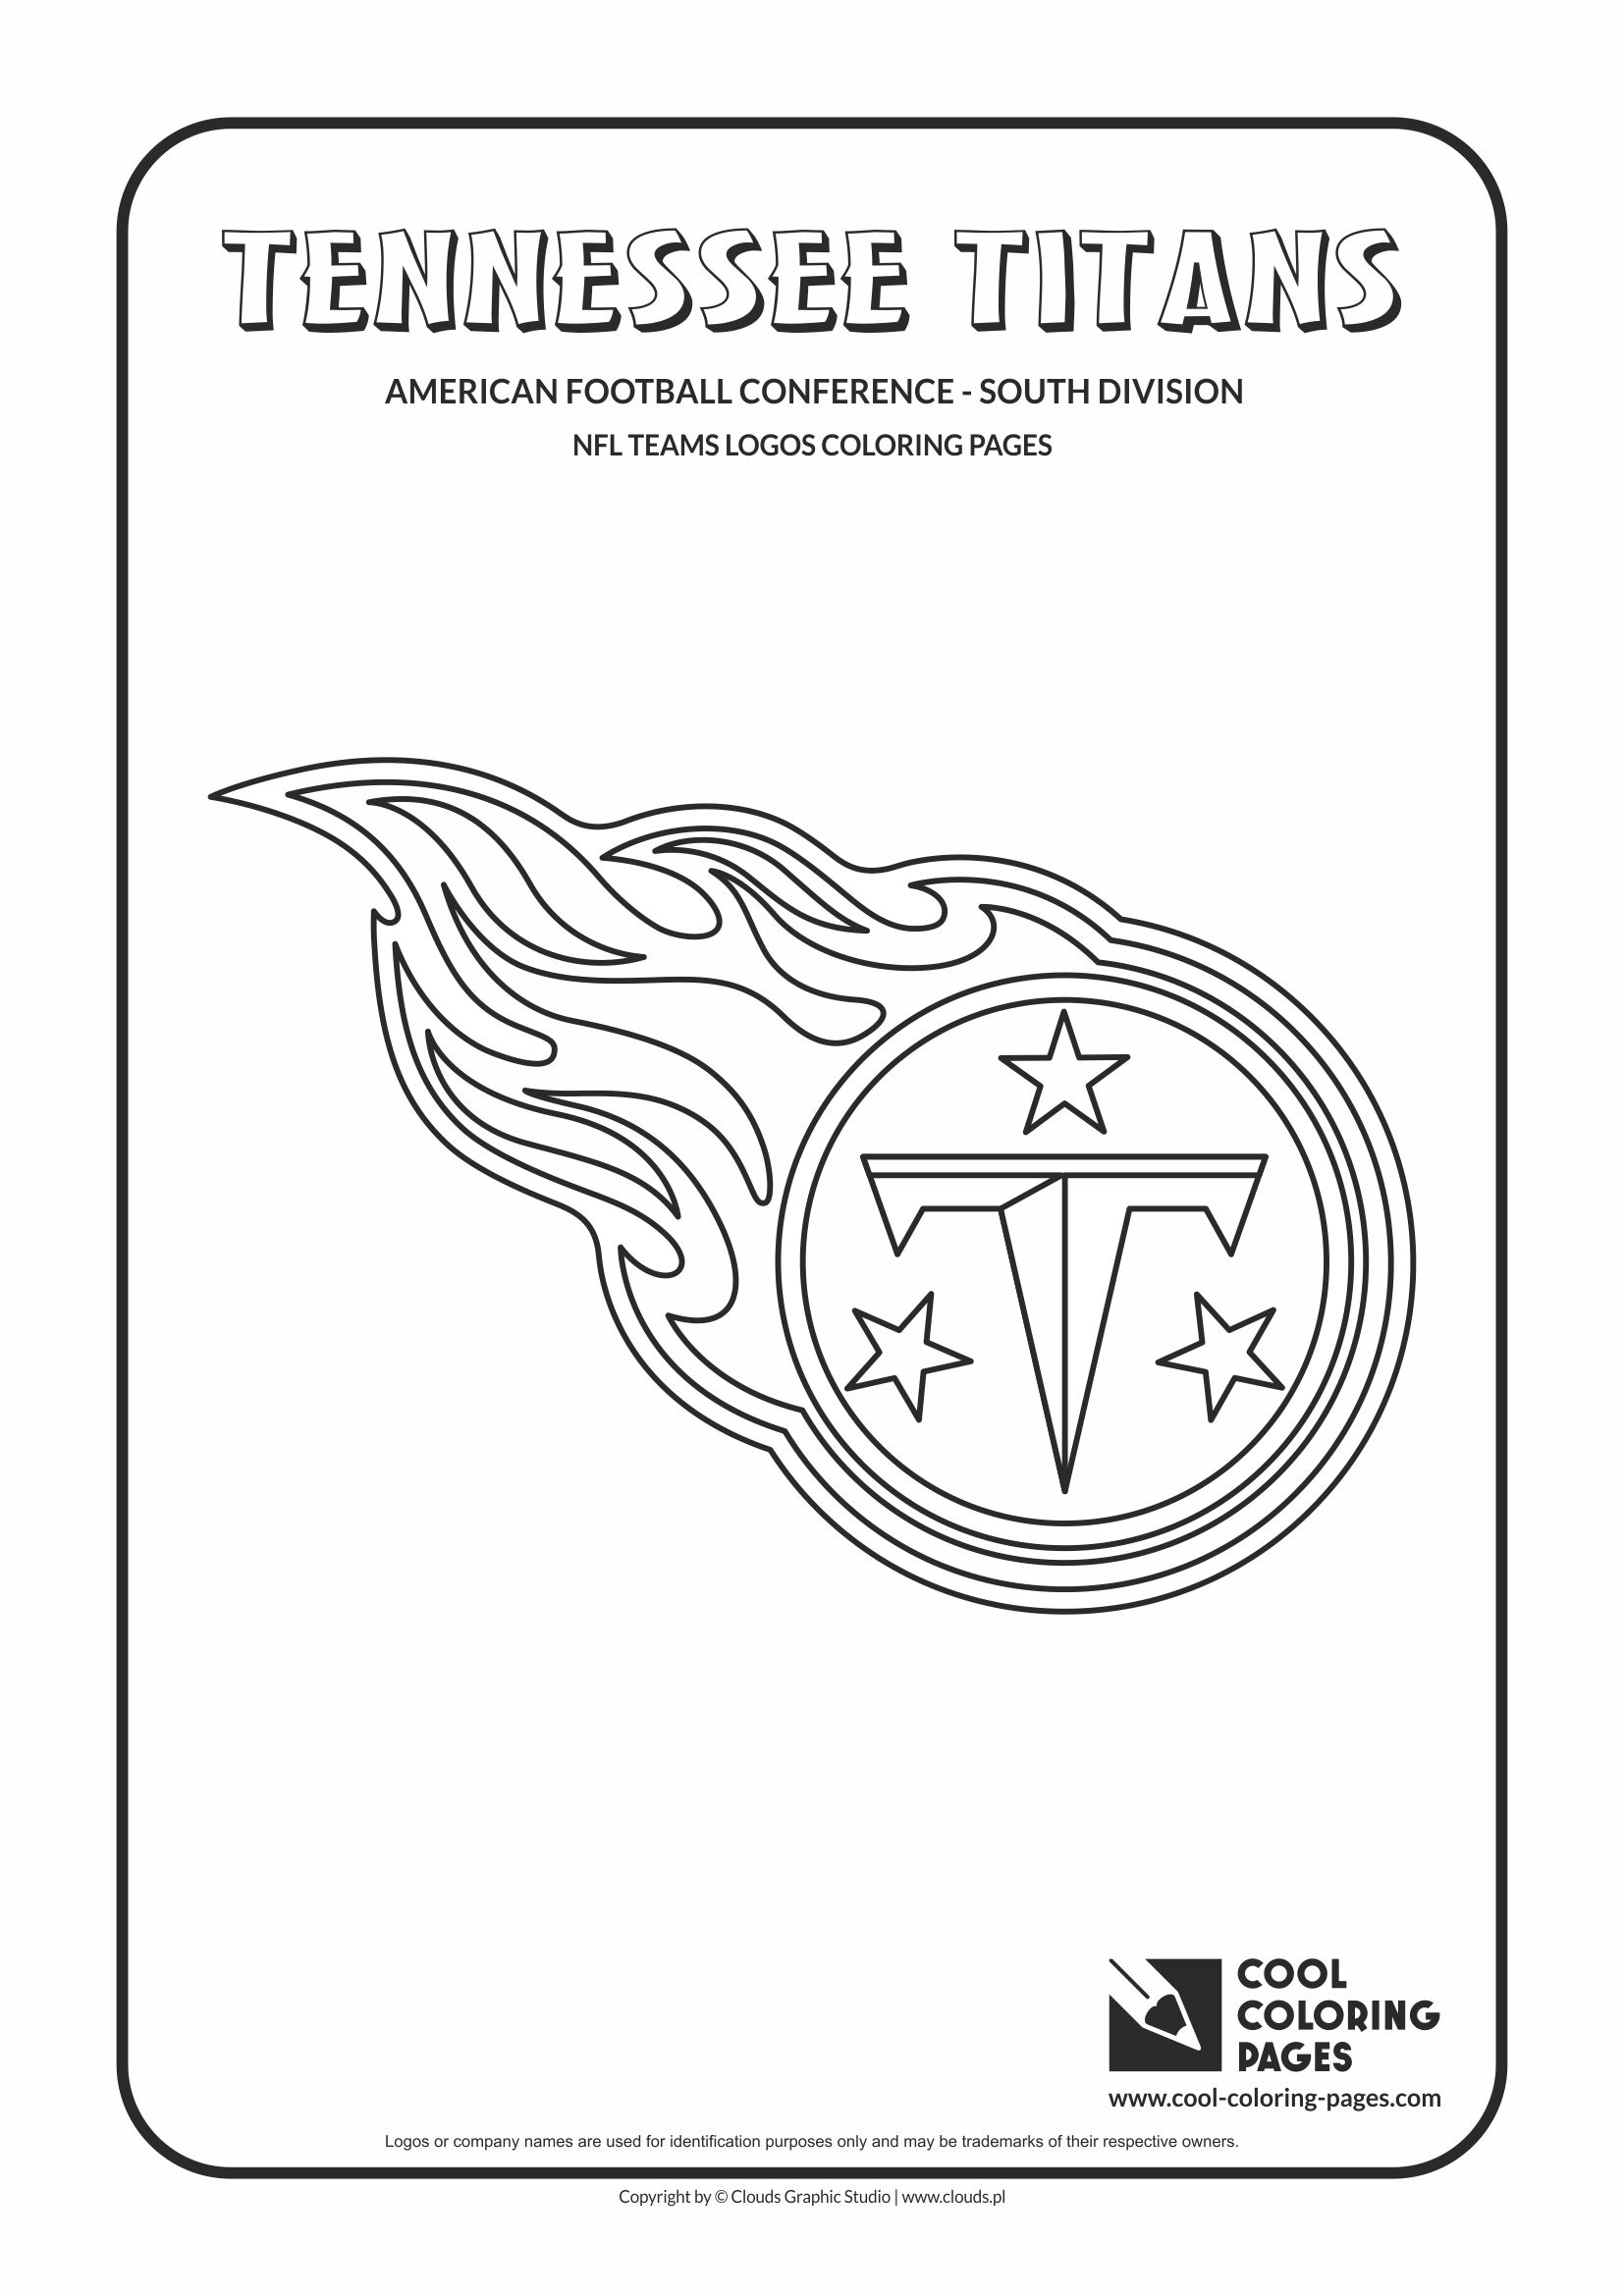 Download Cool Coloring Pages Tennessee Titans - NFL American ...